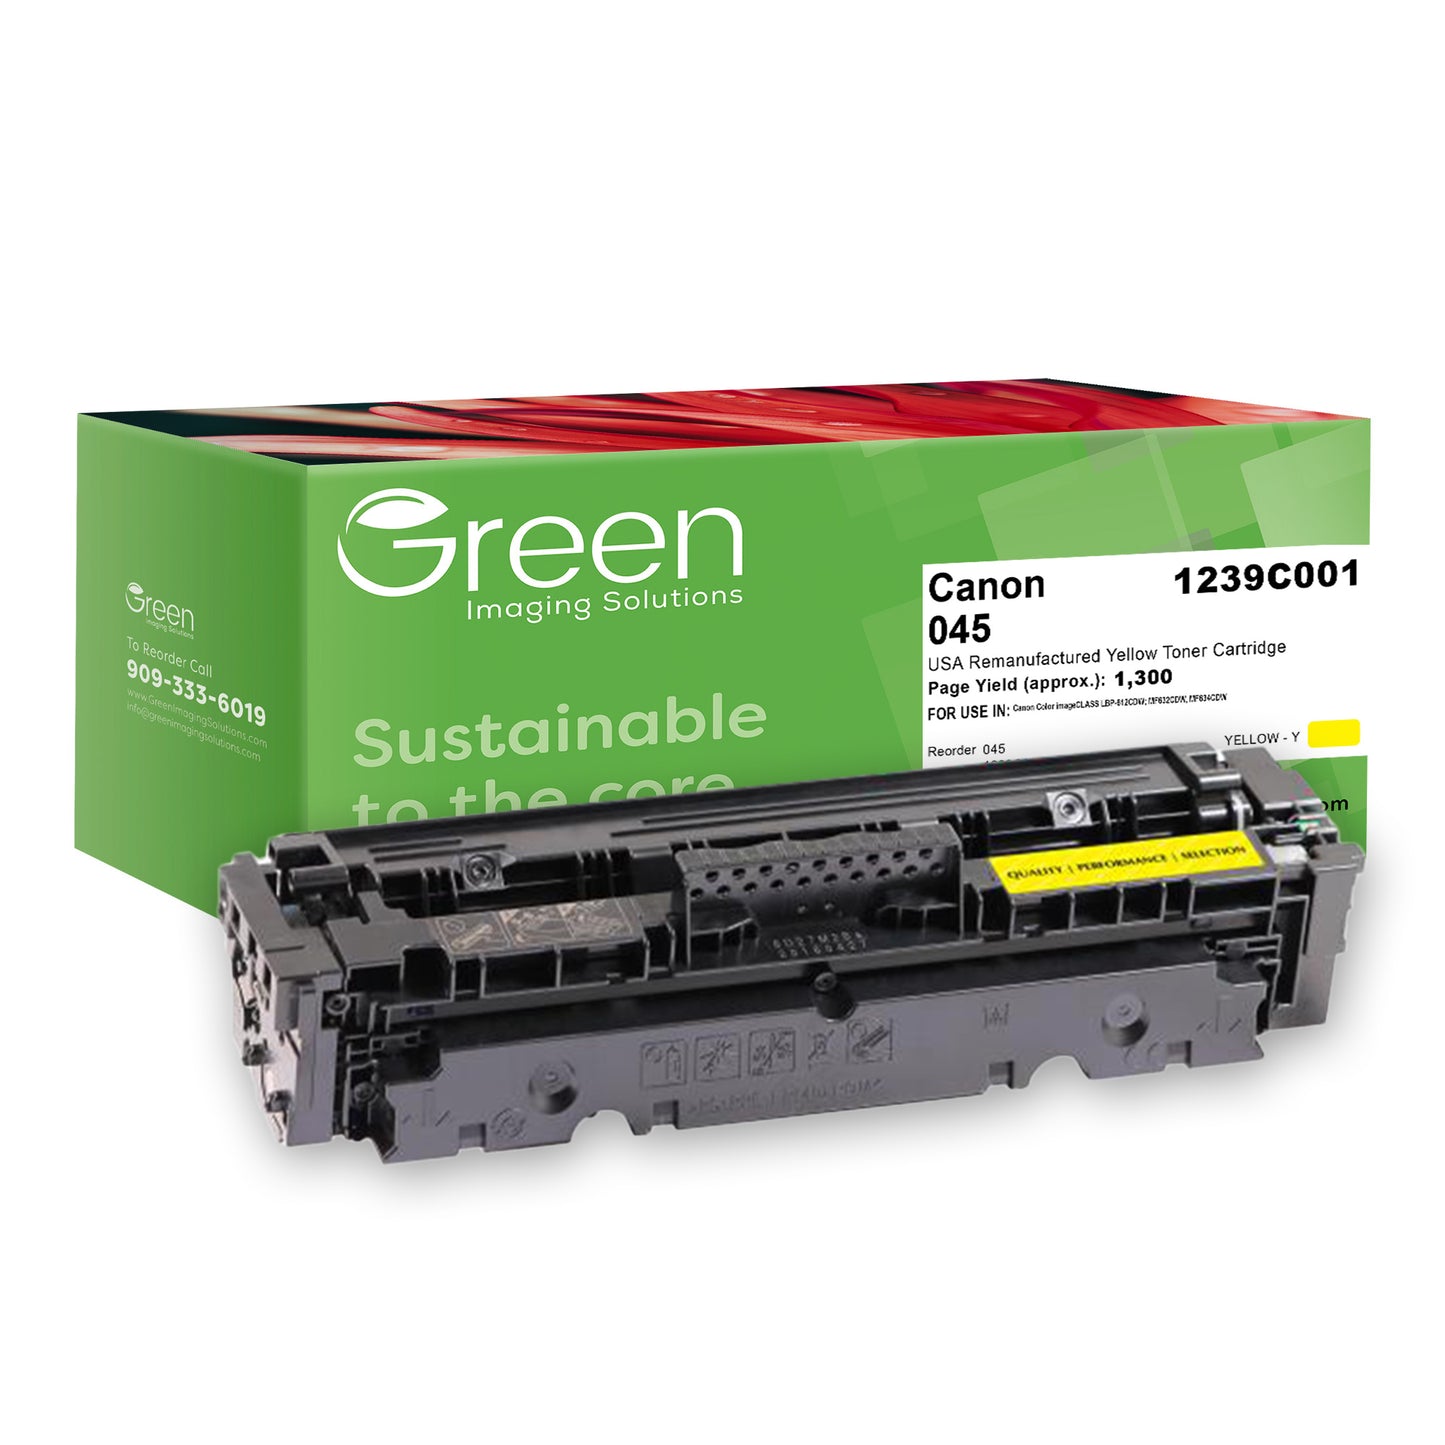 Green Imaging Solutions USA Remanufactured Yellow Toner Cartridge for Canon 1239C001 (045)